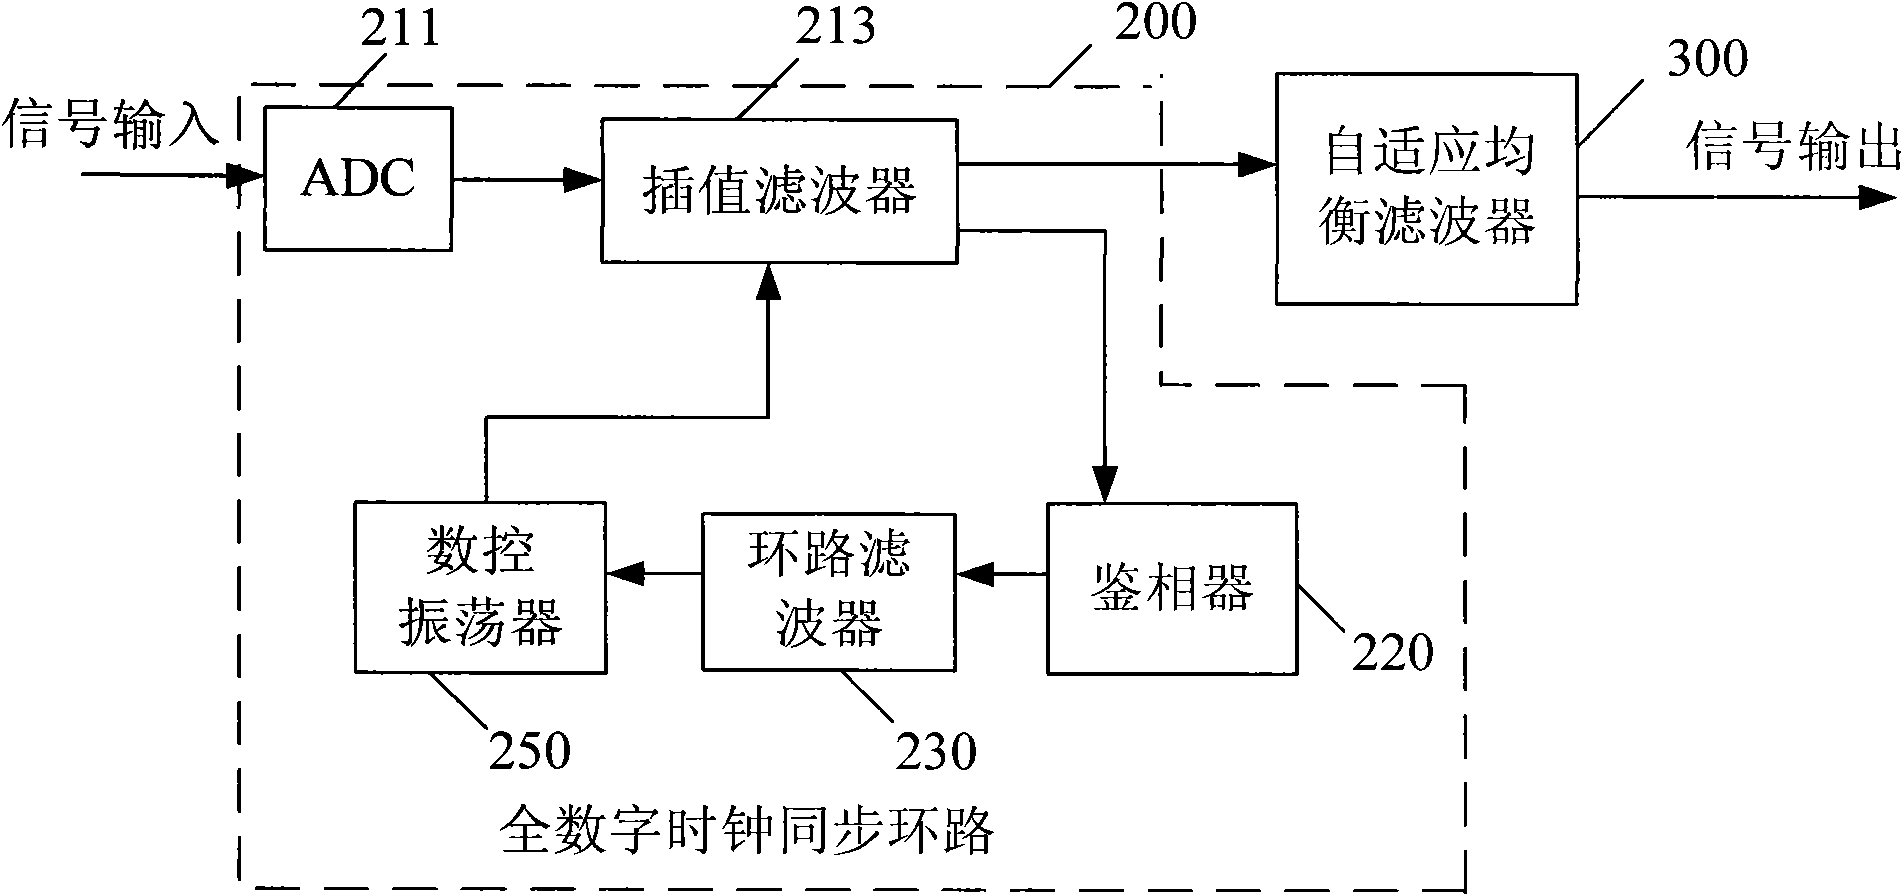 Signal processing system and method